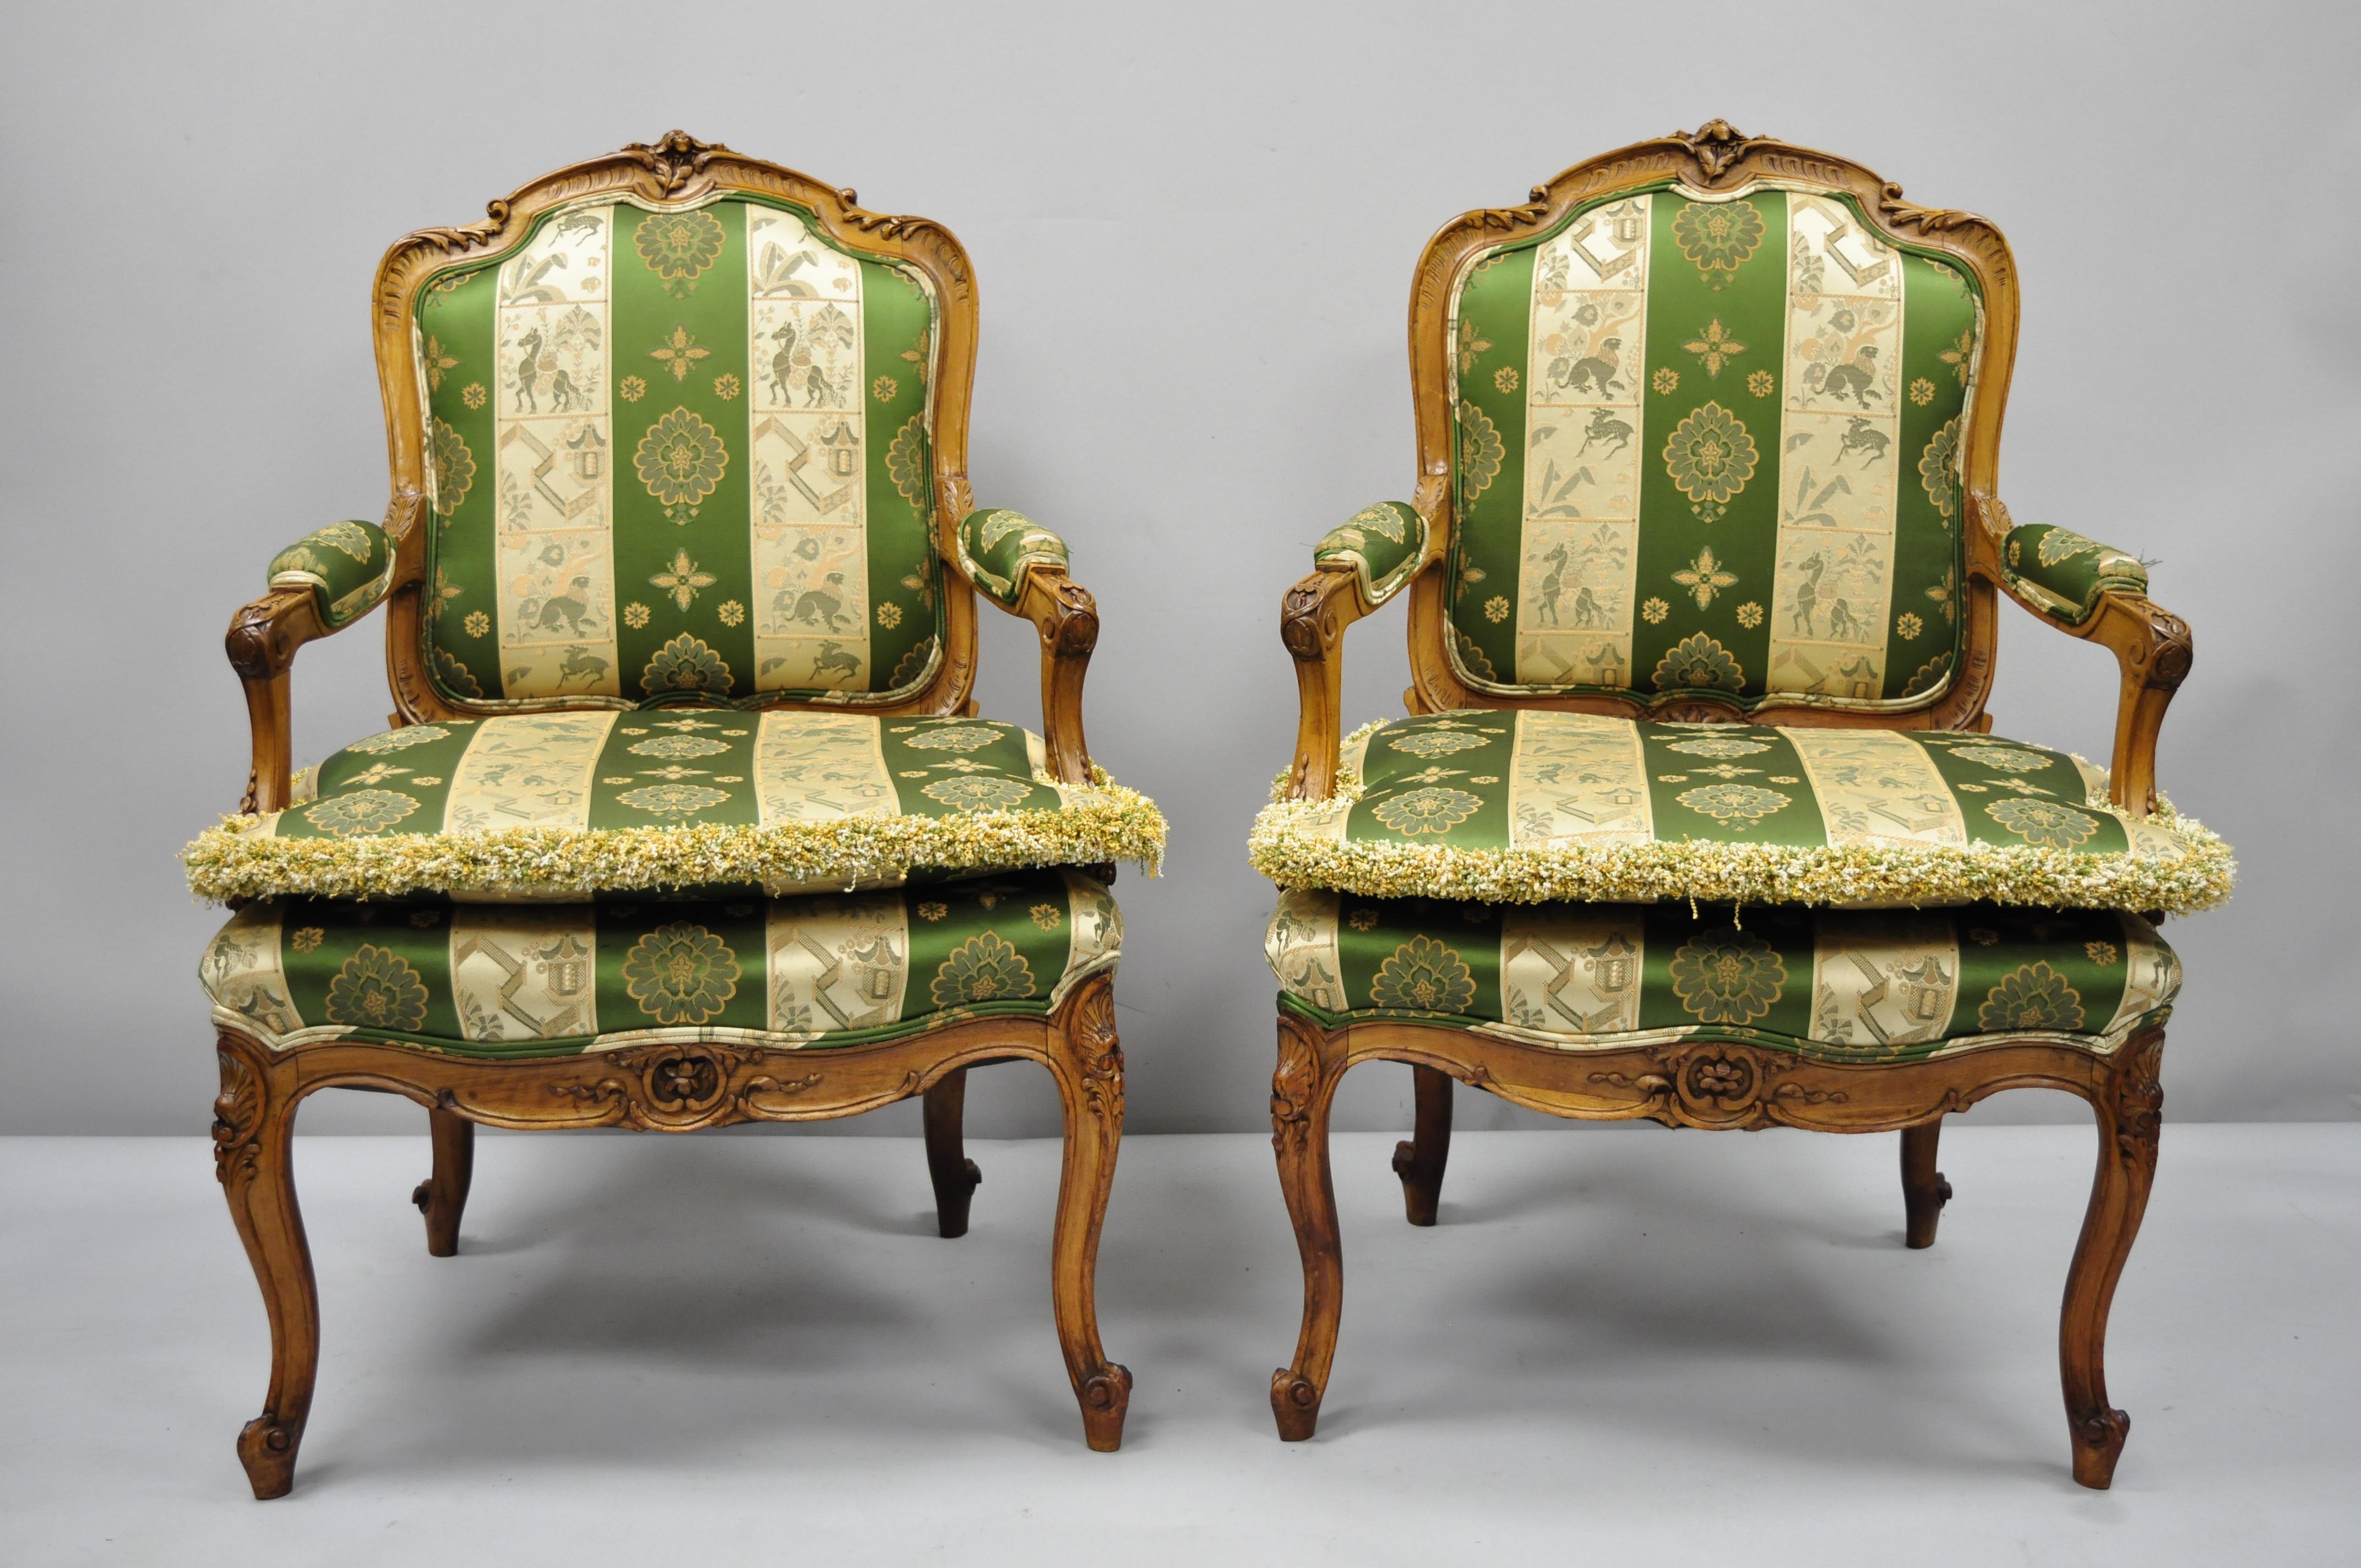 Pair of early 20th century French Louis XV style green and gold walnut fauteuils armchairs. Item features green and gold silk fabric, loose pillow cushions, solid wood frame, upholstered armrests, finely carved details, cabriole legs, quality